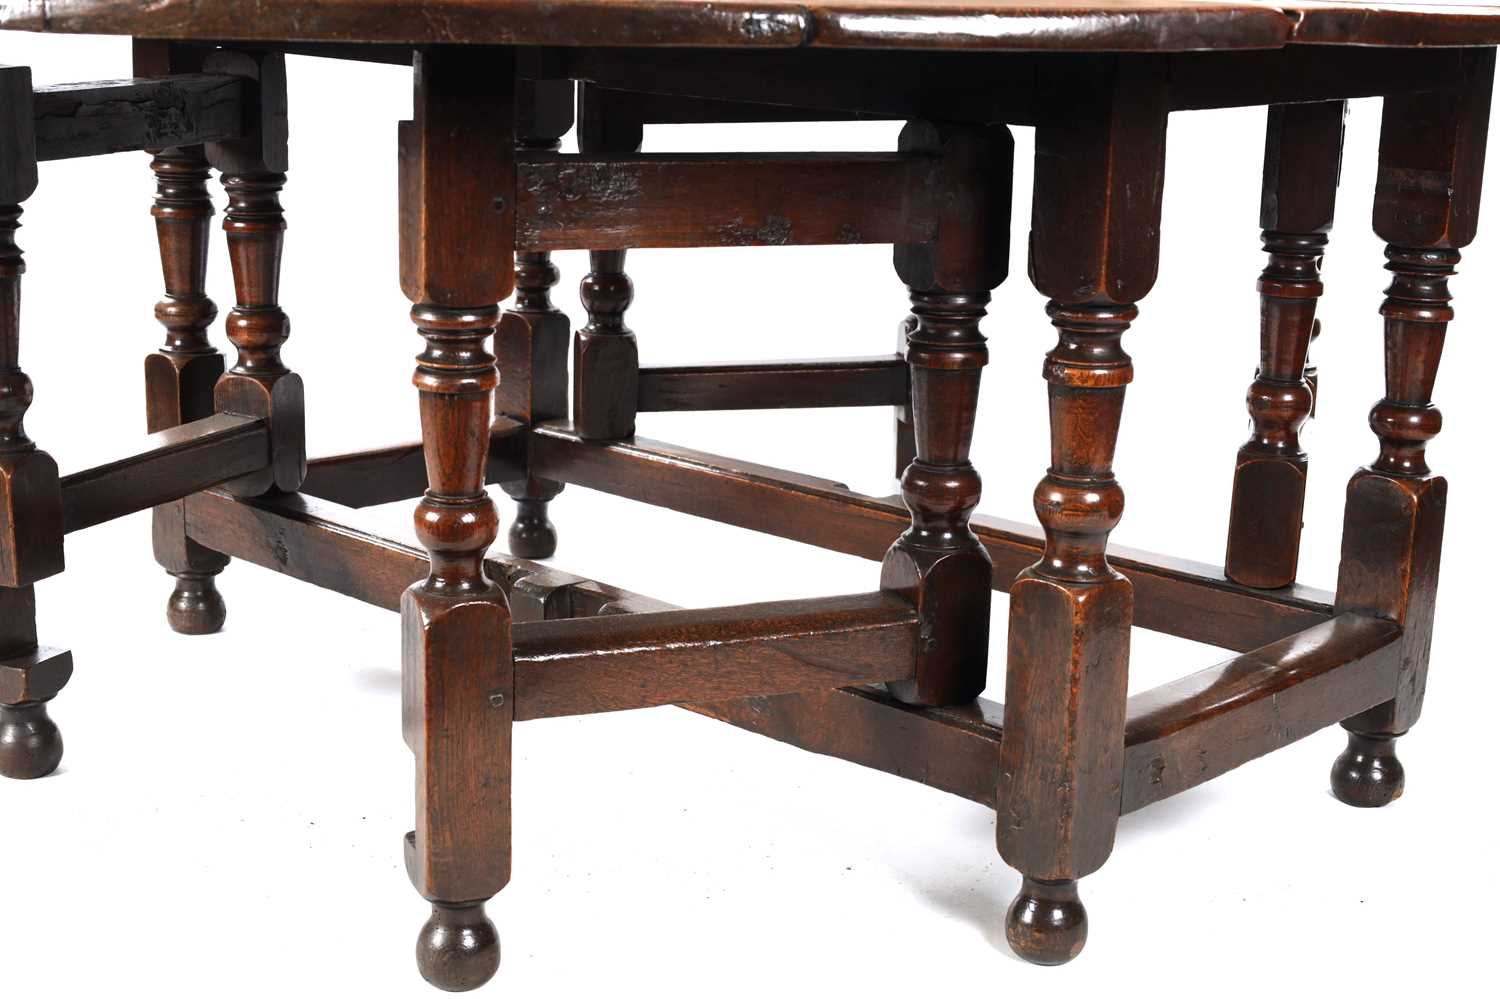 A LARGE 17TH CENTURY JOINED OAK EIGHT SEATER GATE LEG TABLE - Image 4 of 4